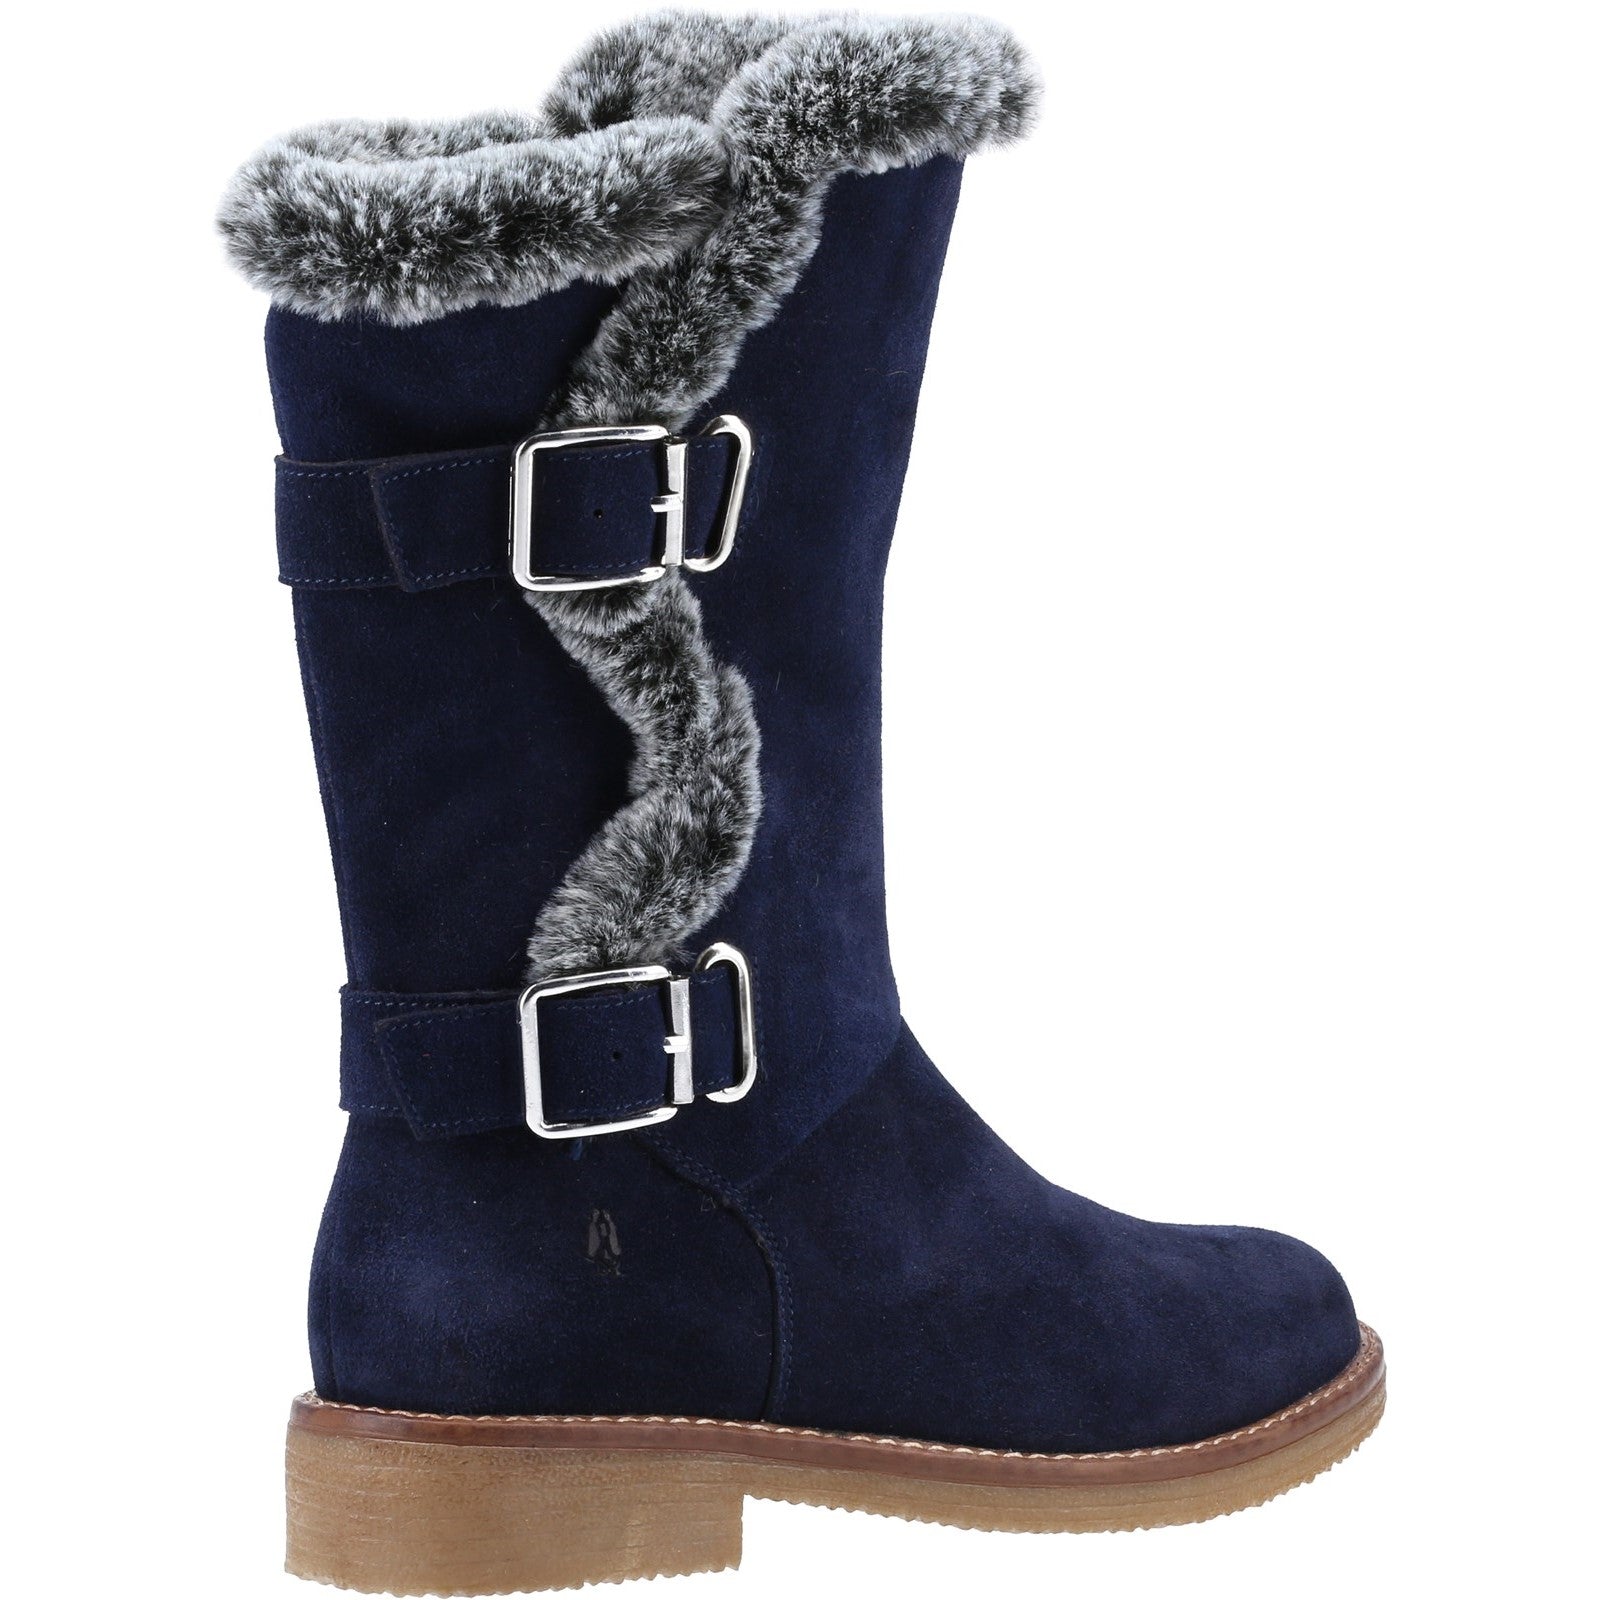 Hush Puppies Womens Megan Suede Mid Boots - Navy